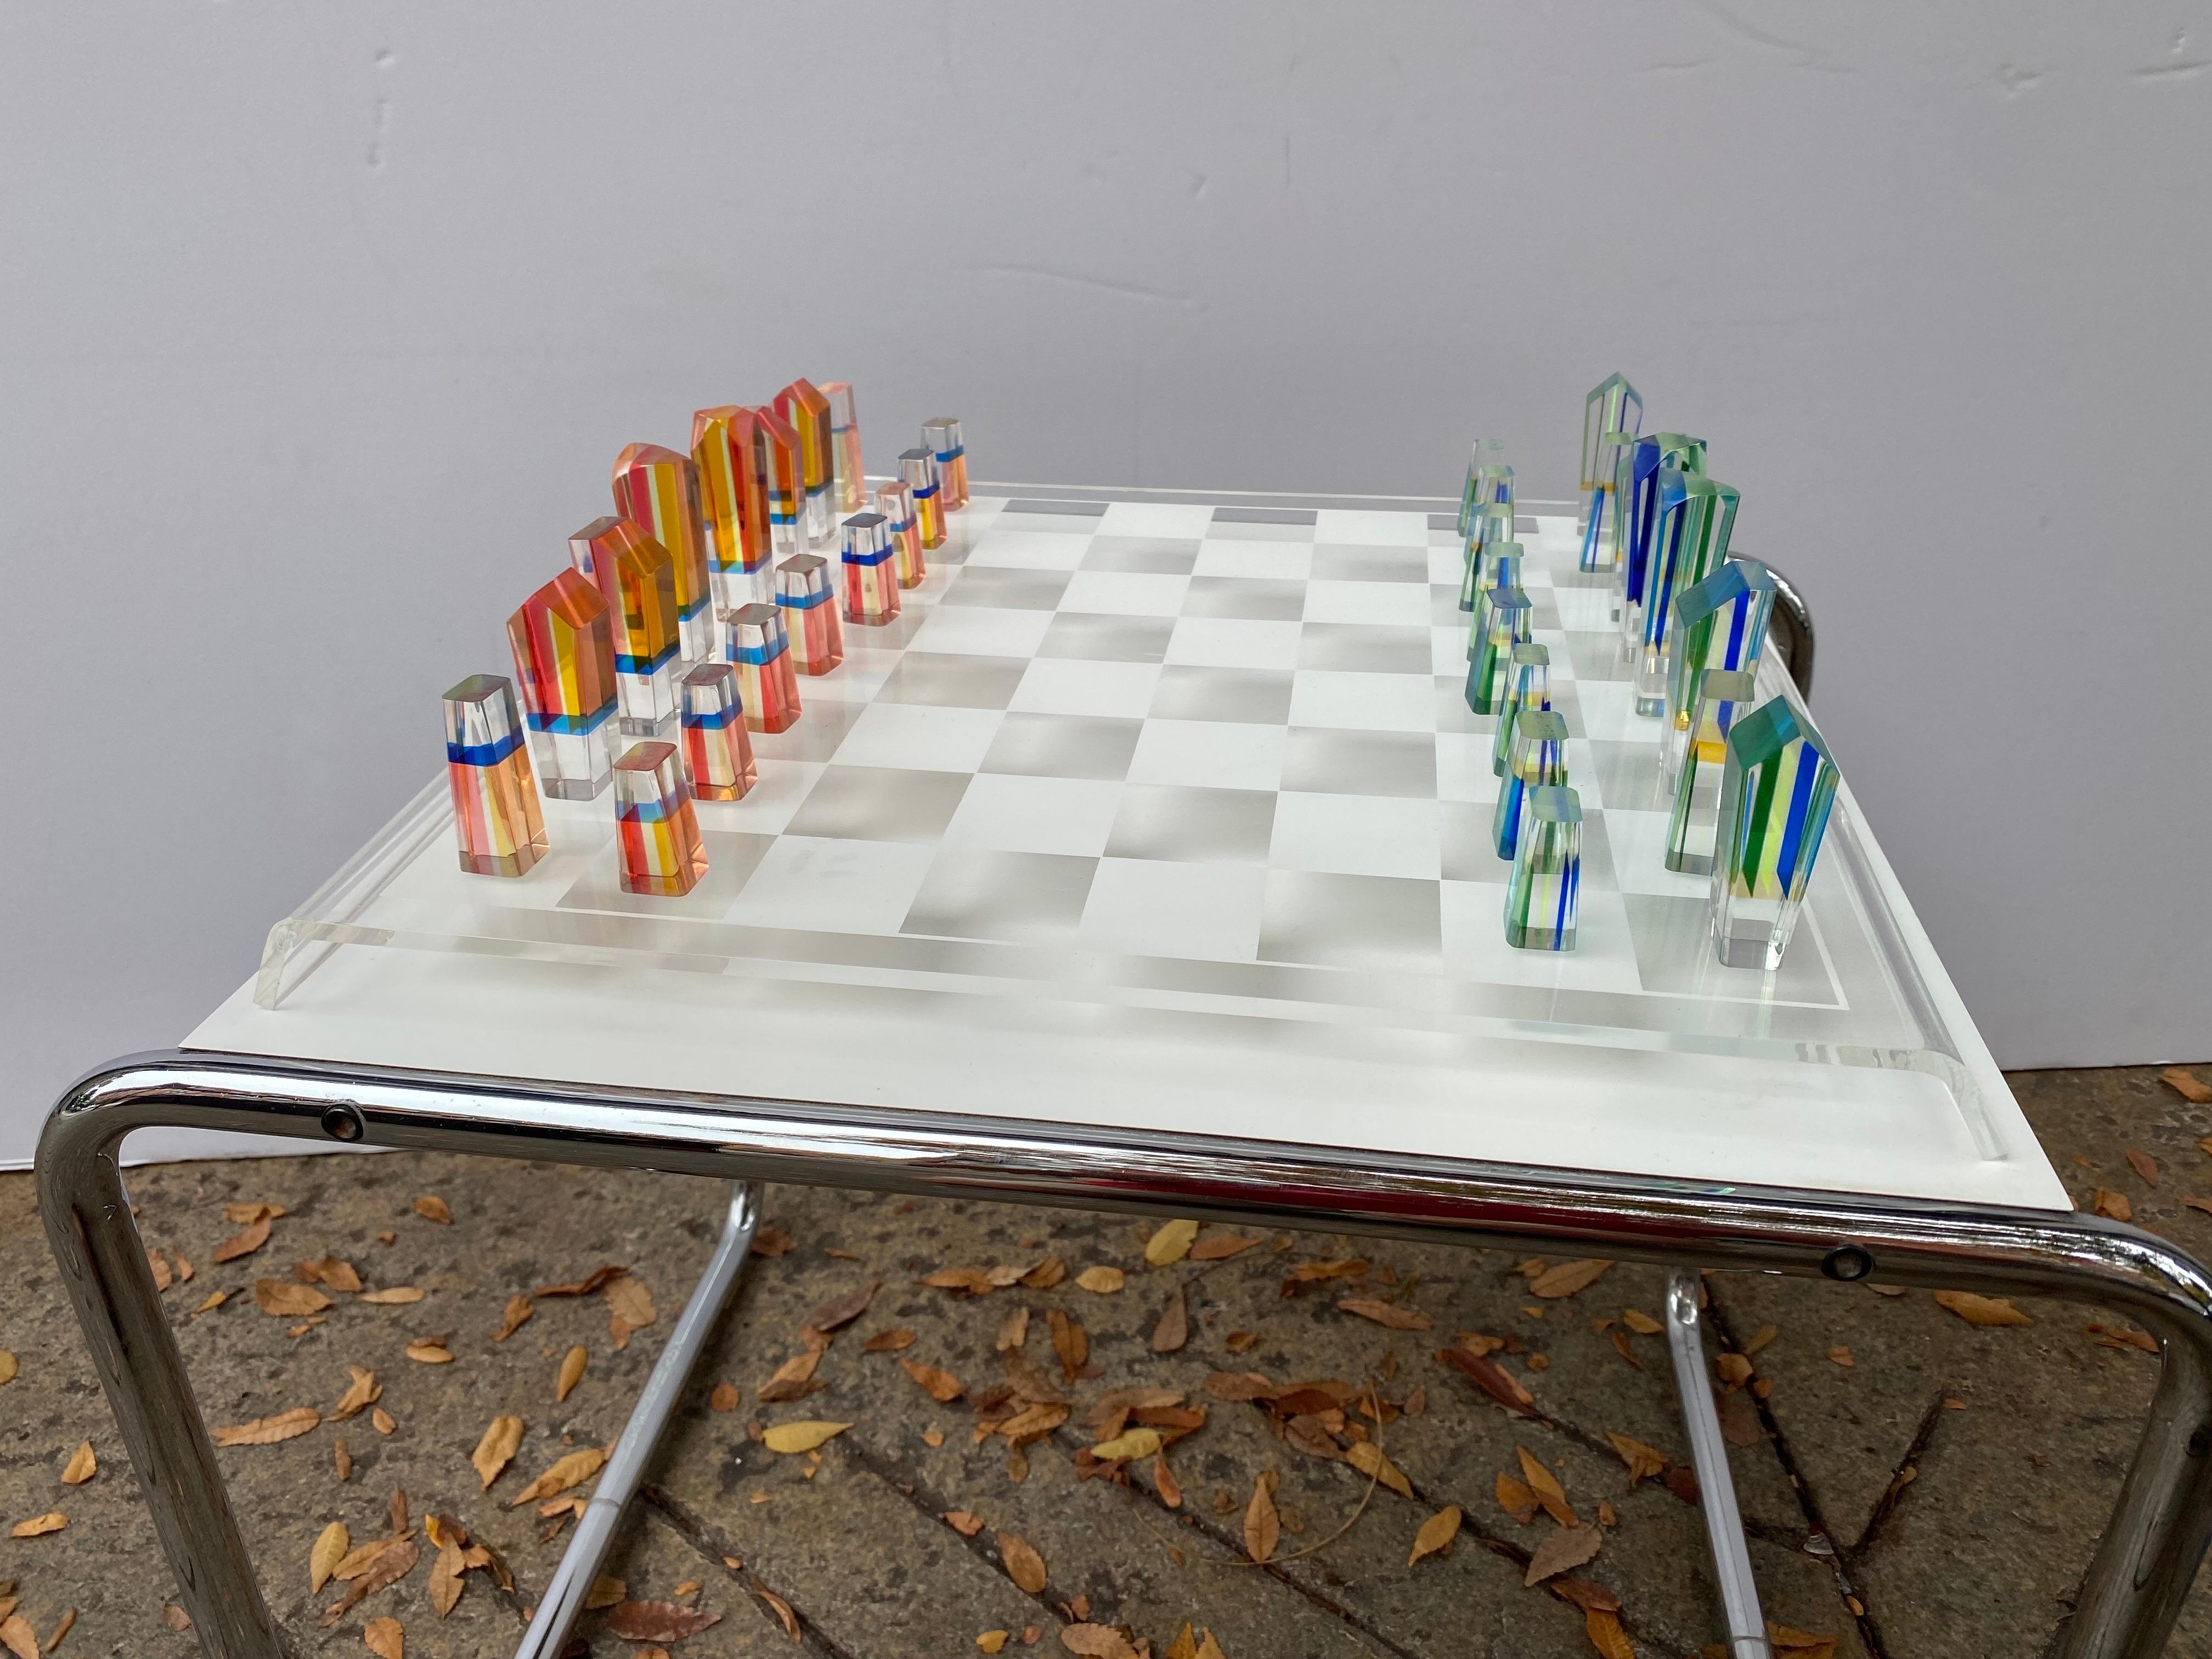 Charles Hollis Jones Lucite chess set and board. Lucite game pieces made of stacked colored lucite. One grouping is in shades of oranges and reds and other half are in blue and greens. Pieces are in very nice shape with no chips or cracks. Probably